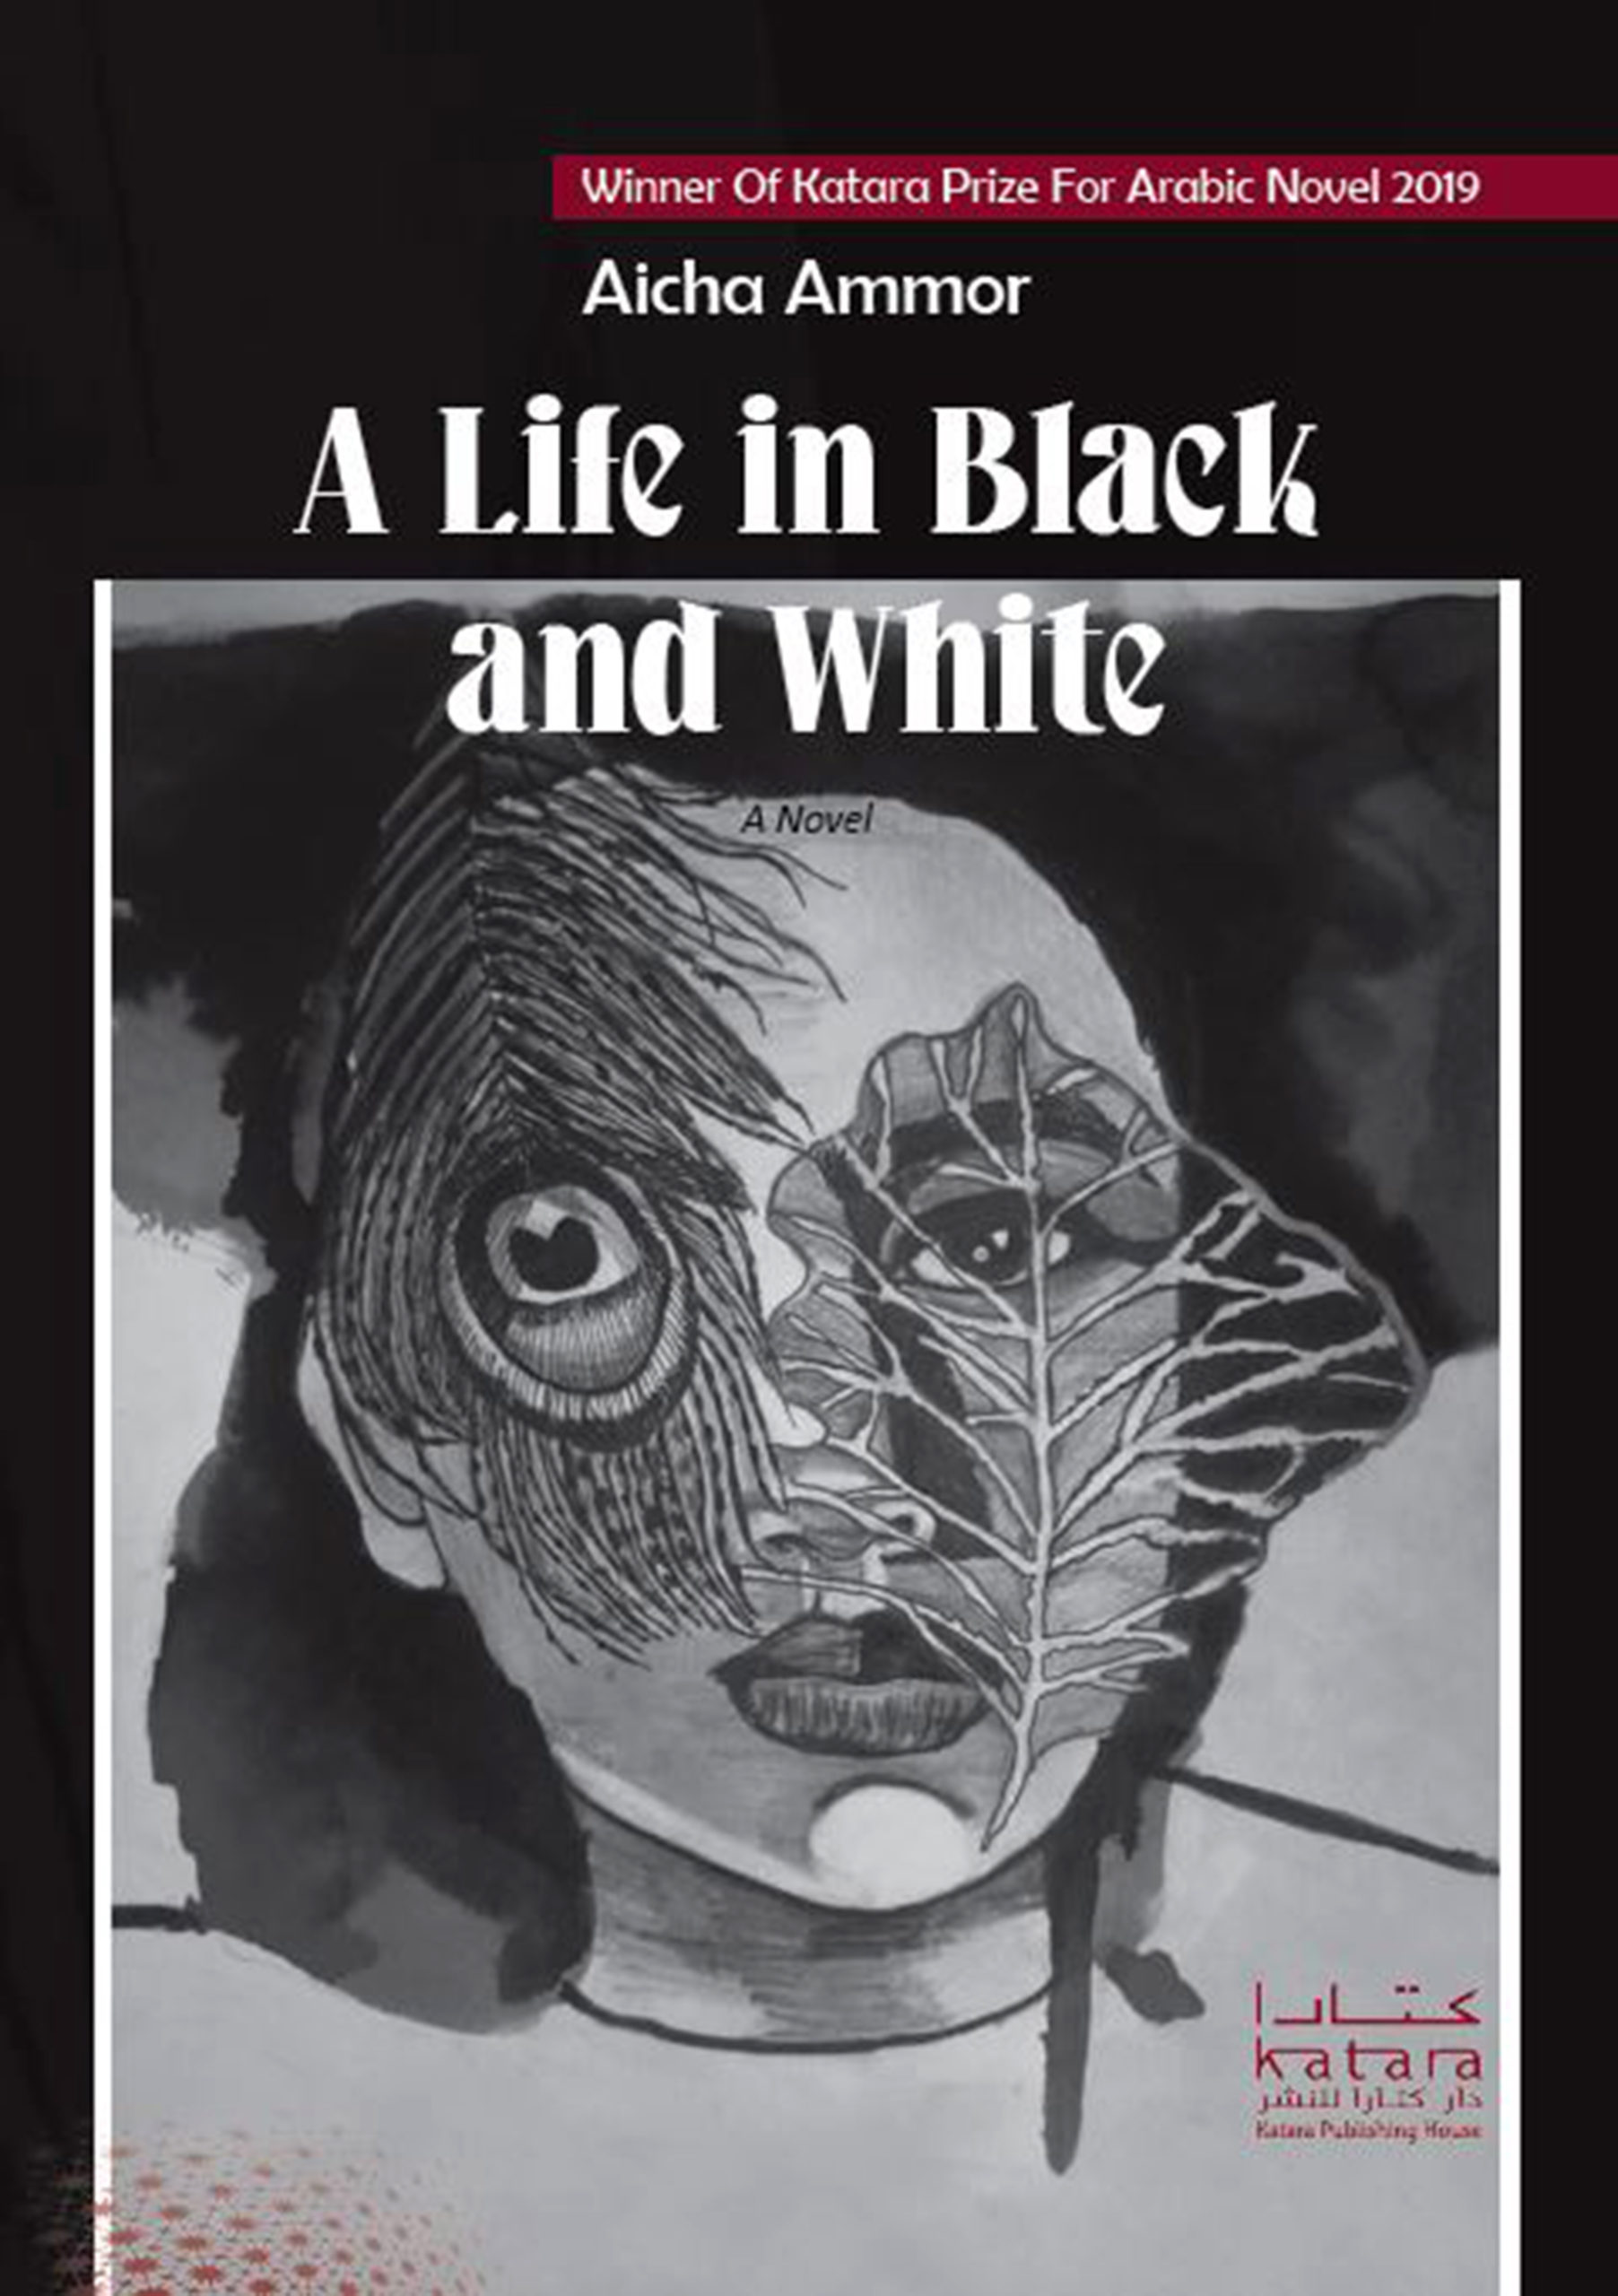 A life in black and white